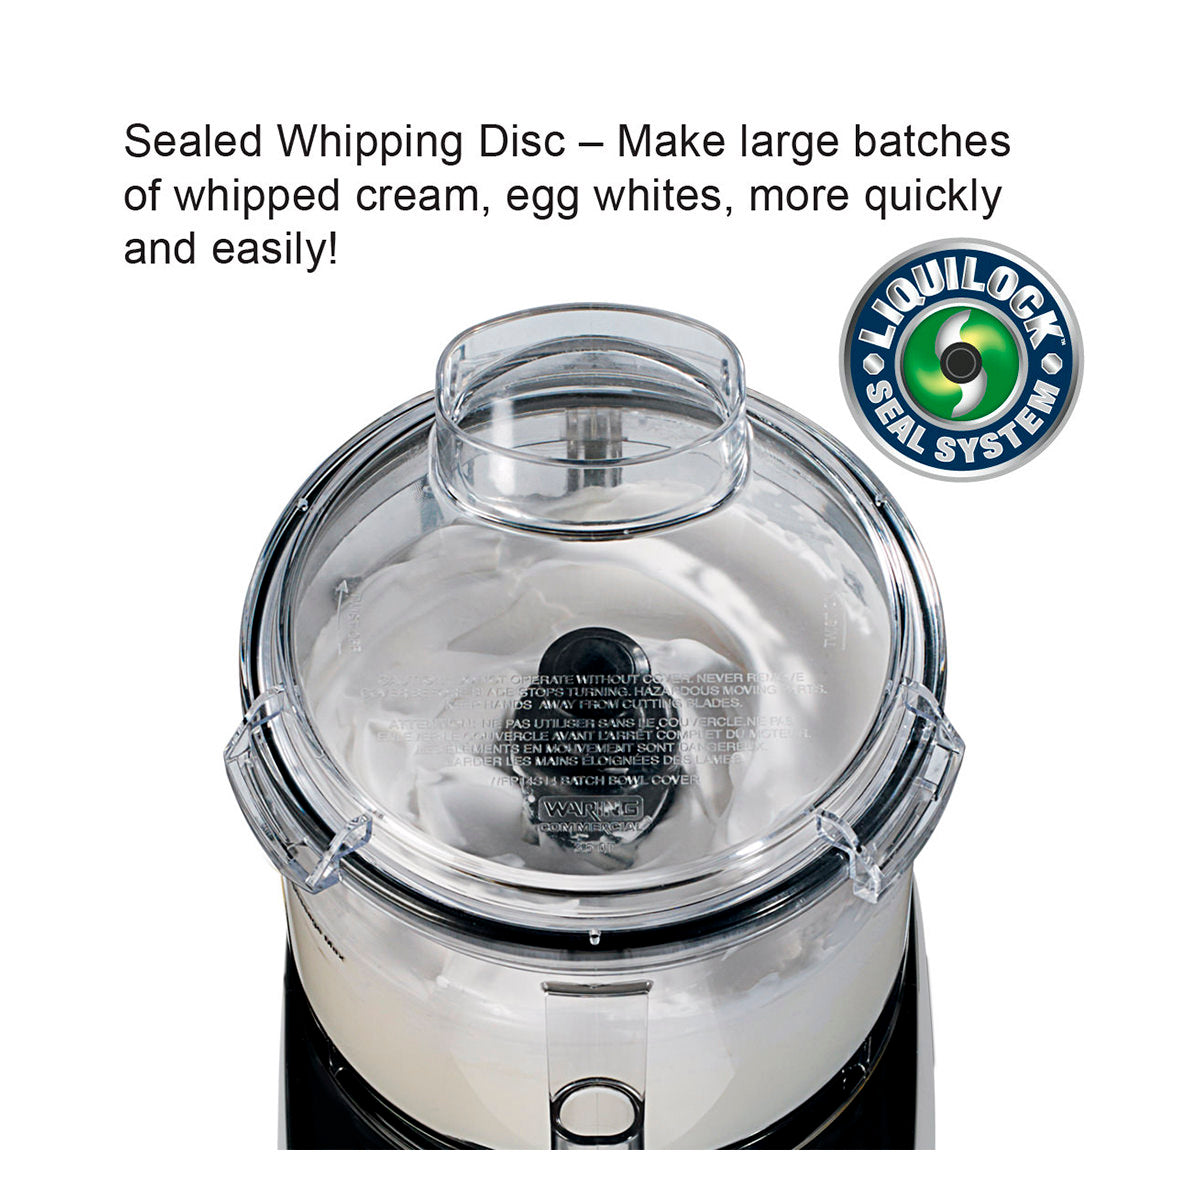 WFP14SW - 3.5-Qt. Bowl Cutter Mixer with Flat Lid and LiquiLock Seal System by Waring Commercial